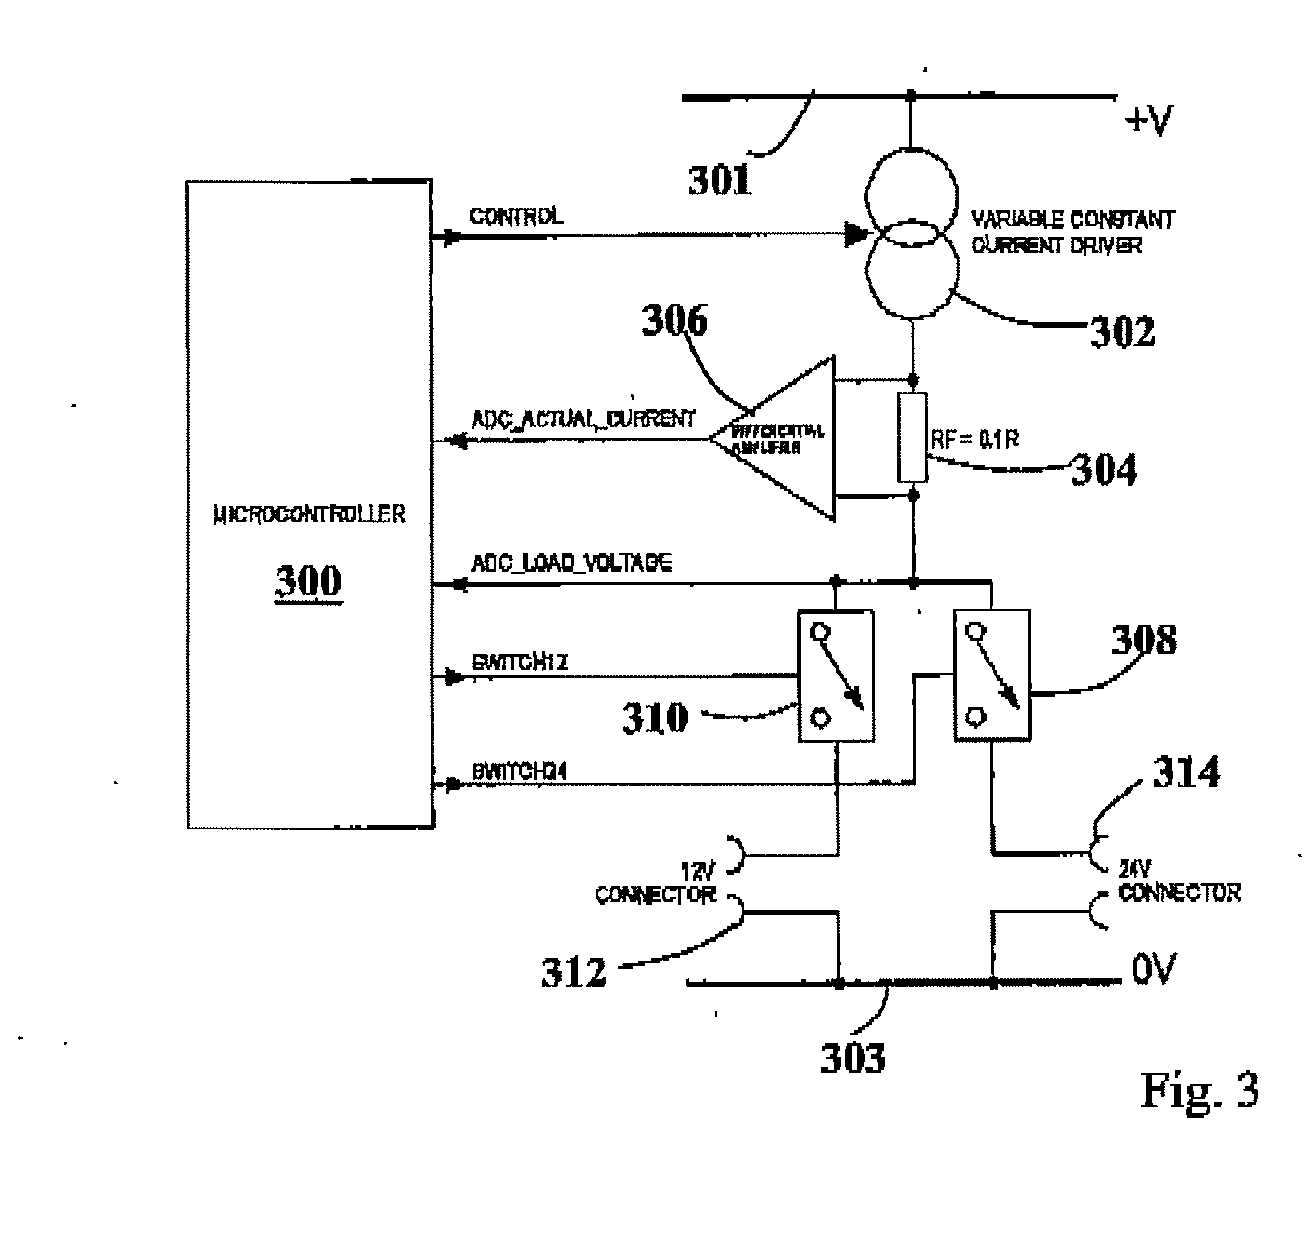 Apparatus for the Control of Lighting and Associated Methods